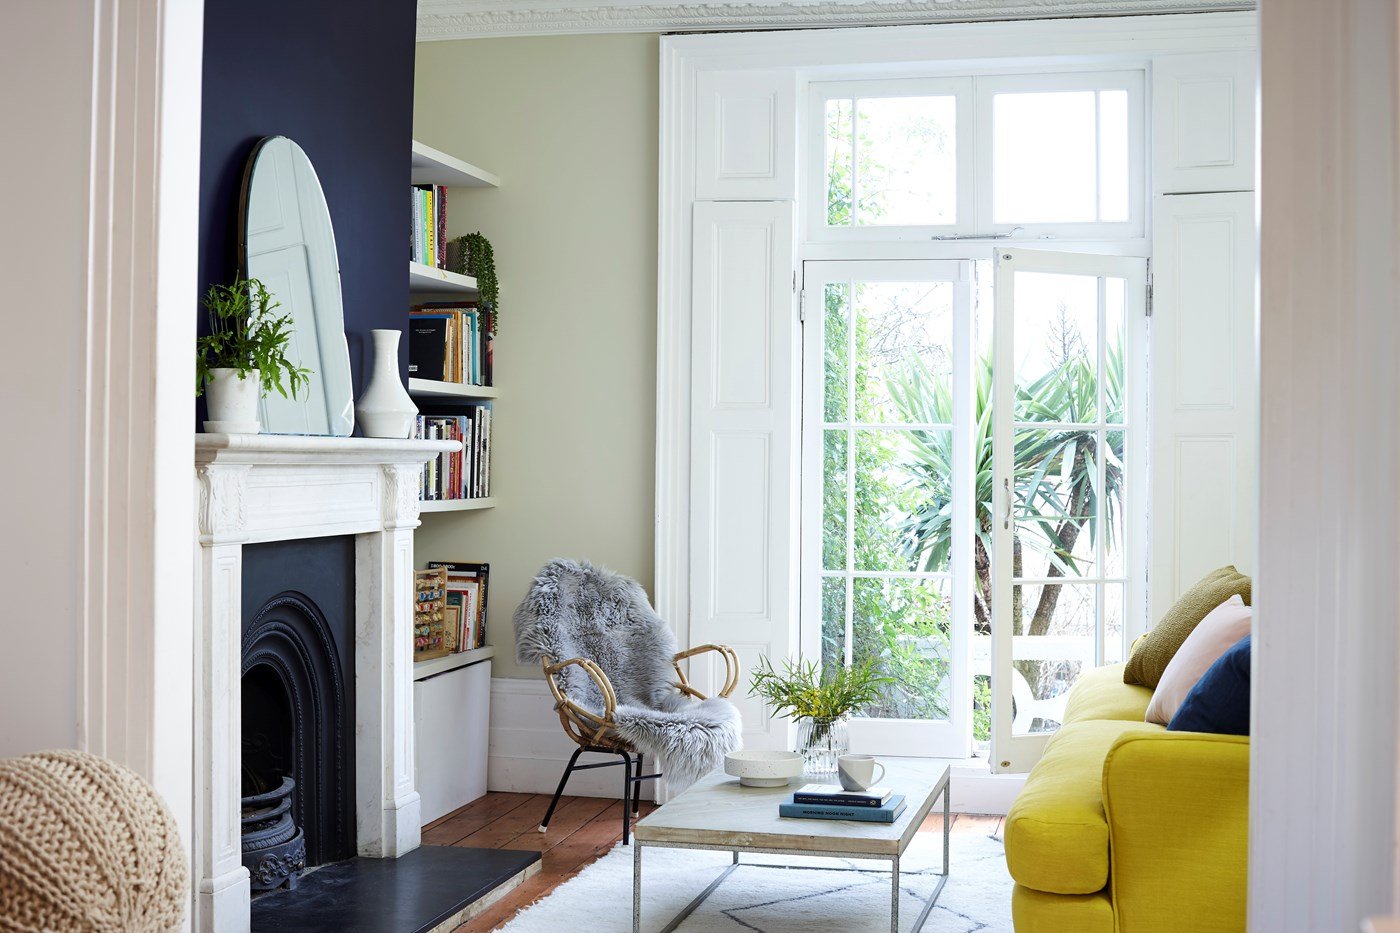 farrow & ball understand customers and drive growth